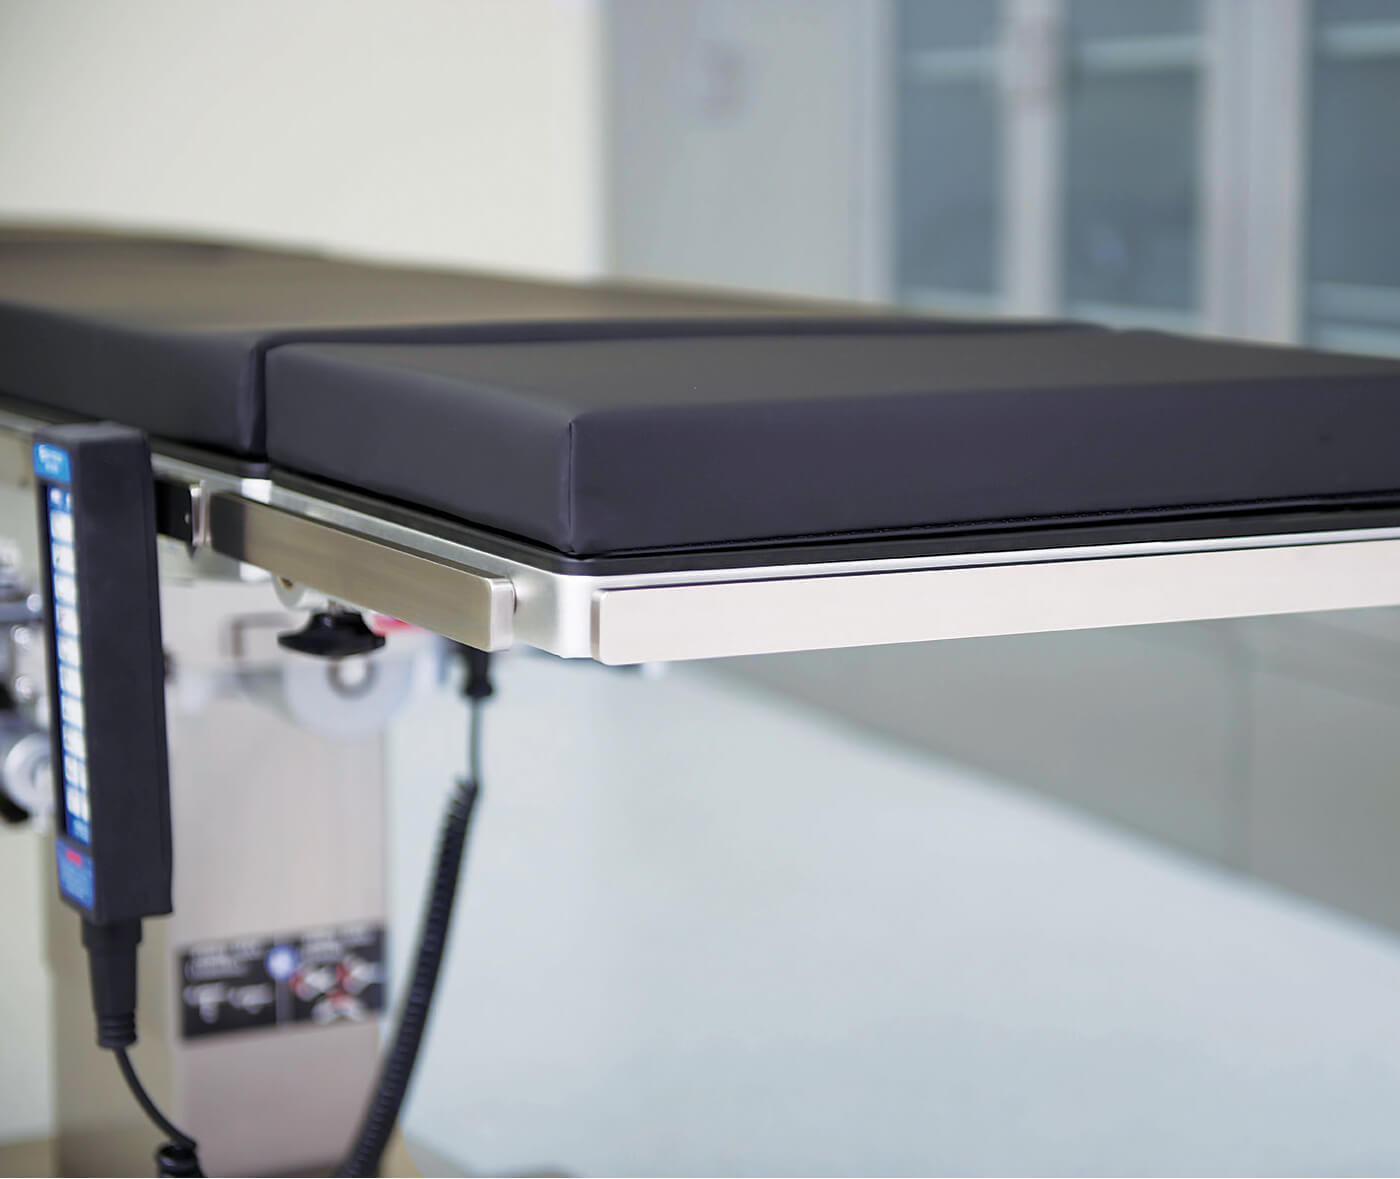 Skytron surgical tables reduce risky maneuvers with patients and provide better access for surgeons during operation